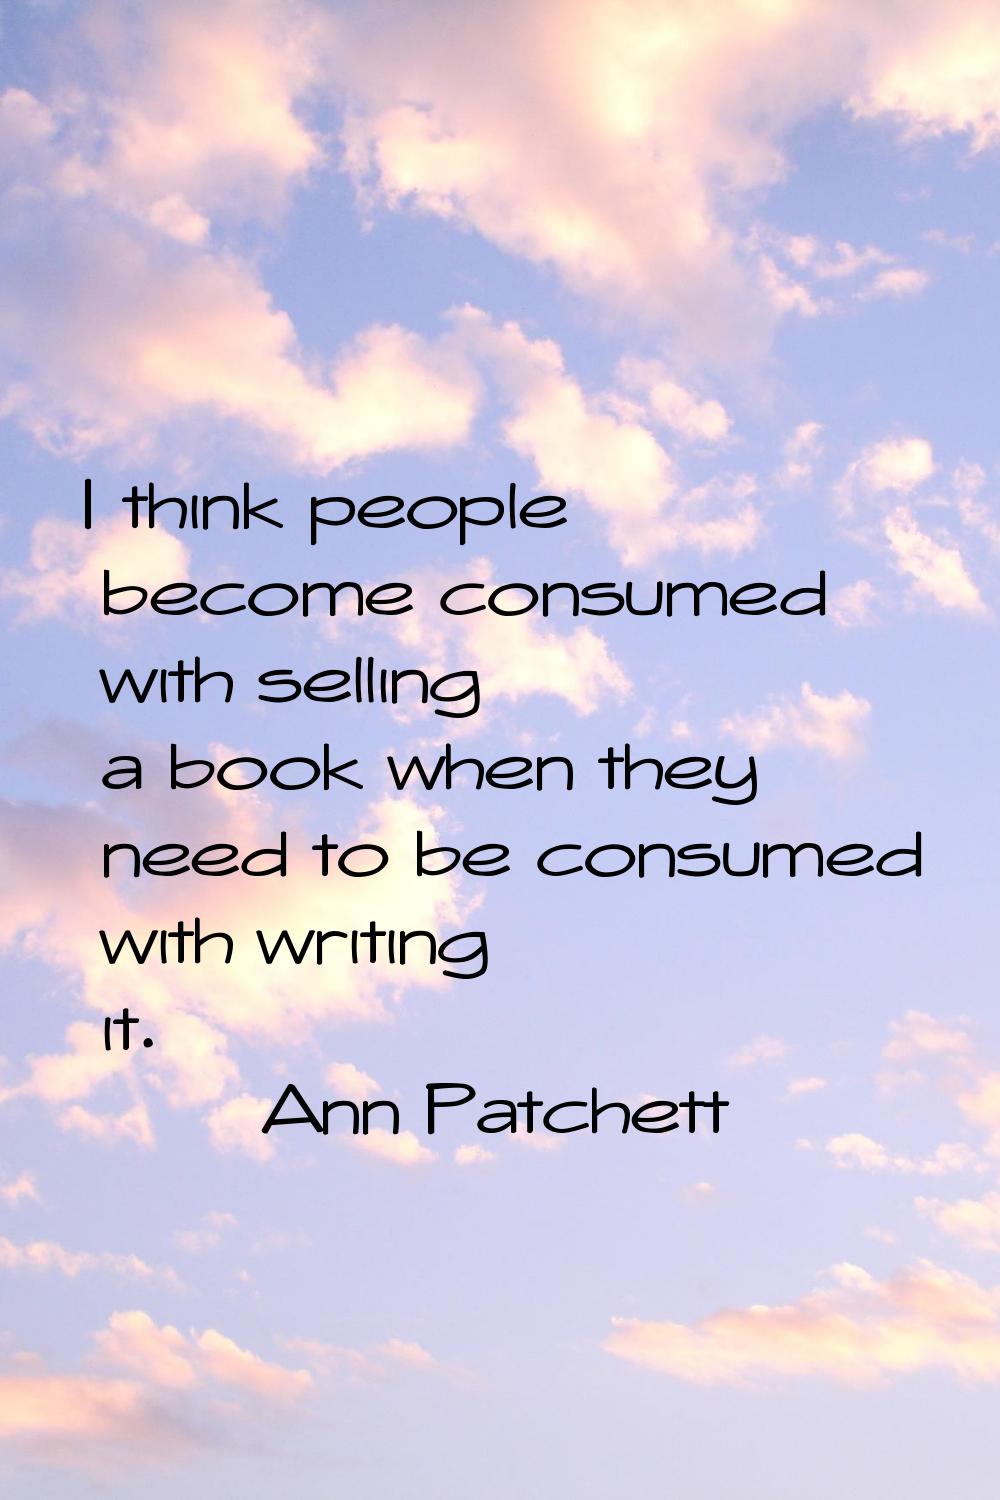 I think people become consumed with selling a book when they need to be consumed with writing it.